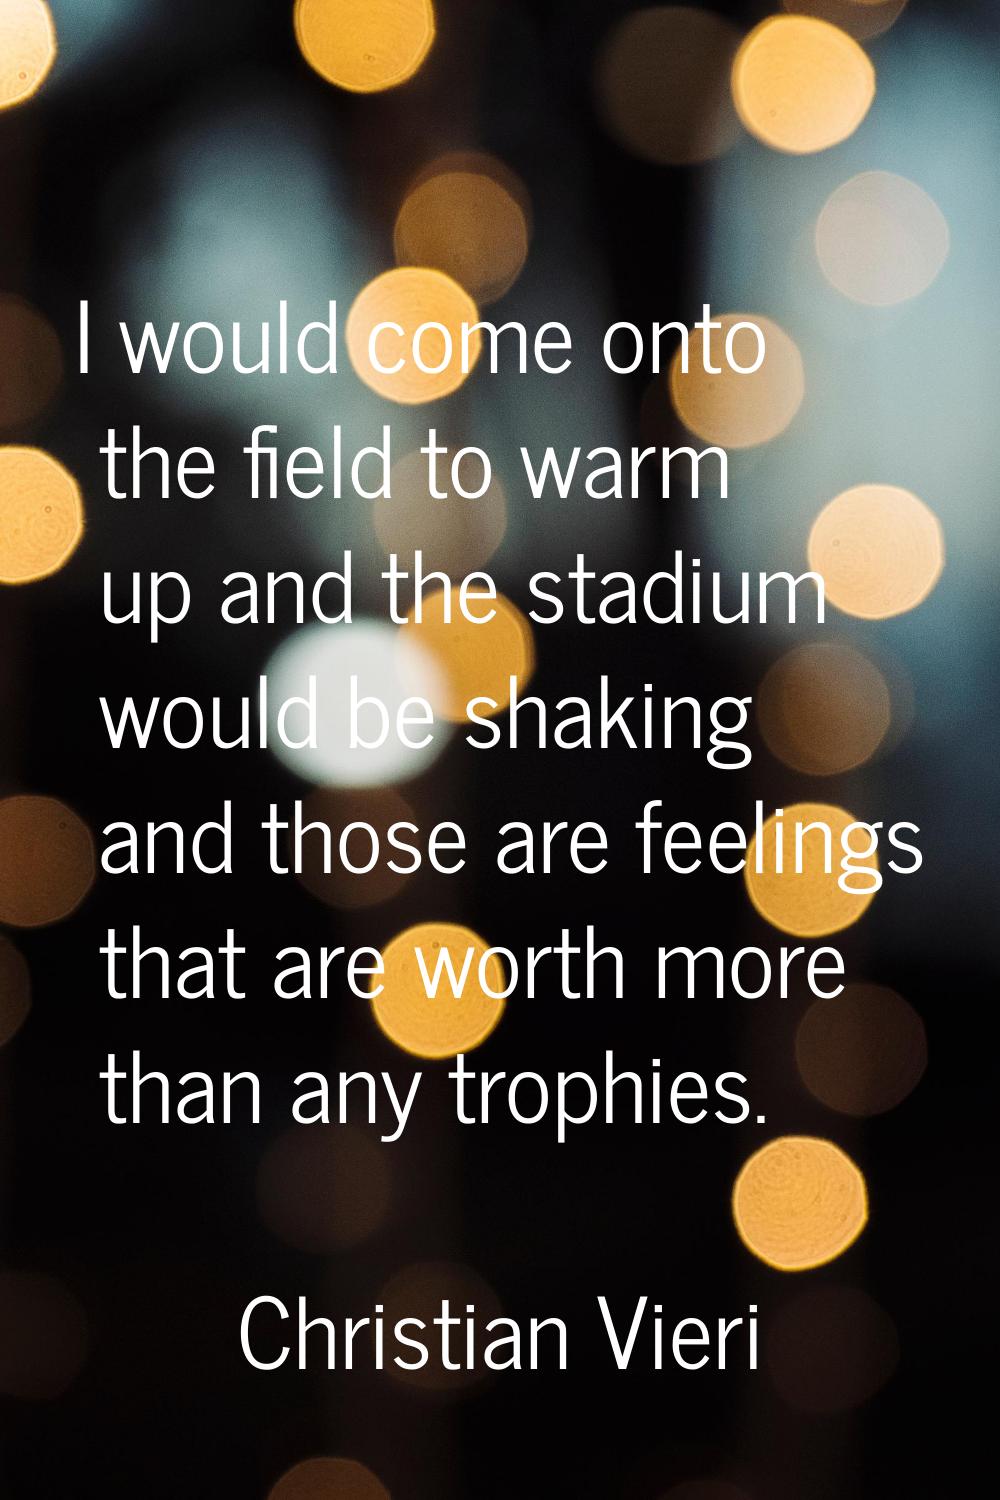 I would come onto the field to warm up and the stadium would be shaking and those are feelings that